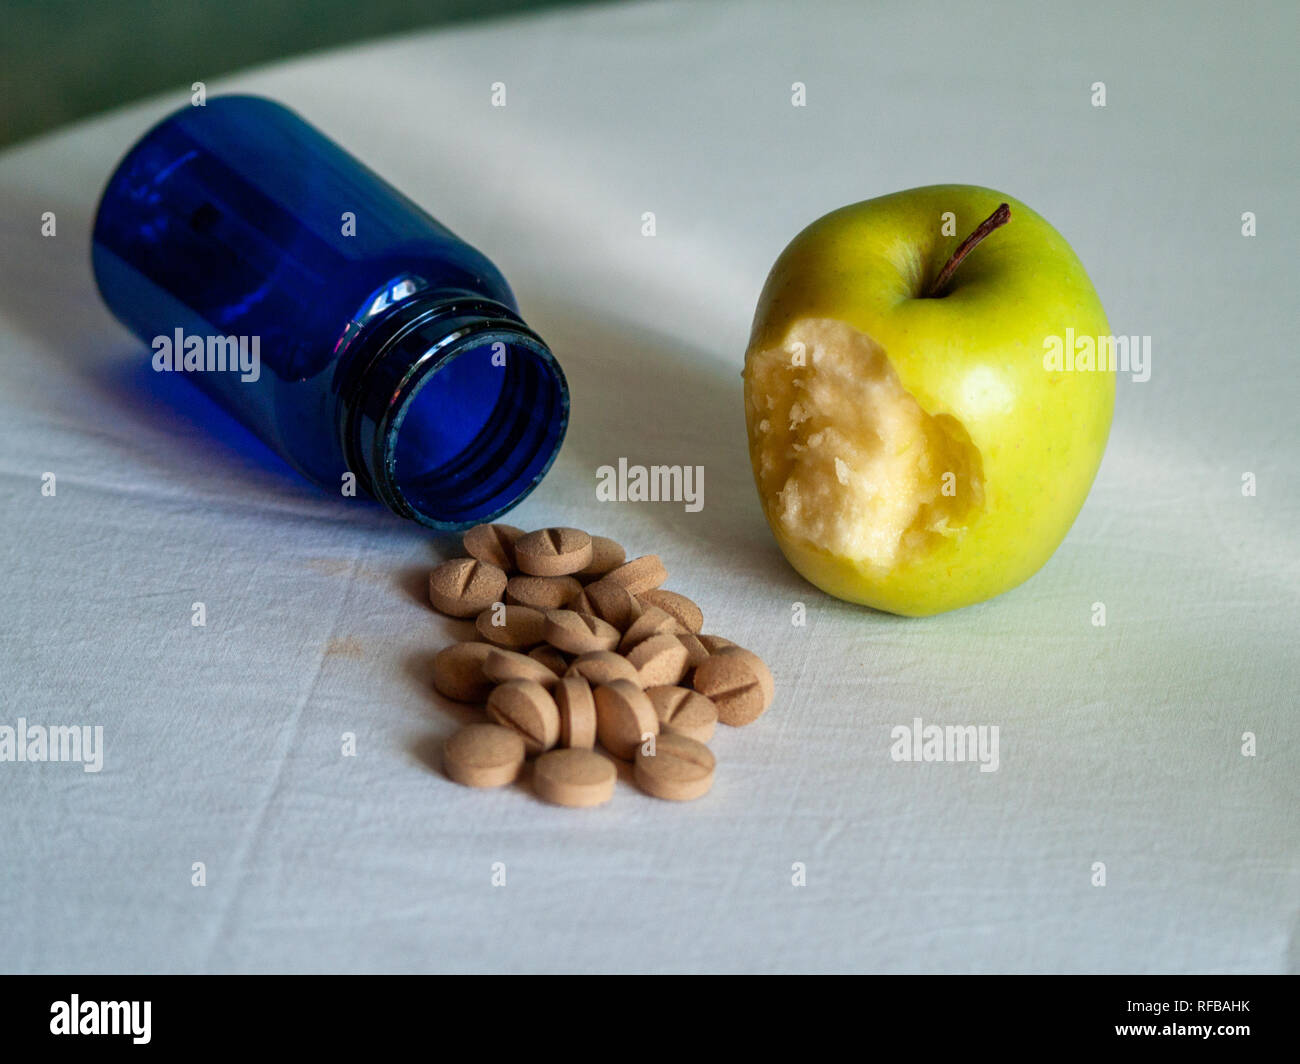 A bitten apple and a blue container with vegetable fiber pills on a table Stock Photo